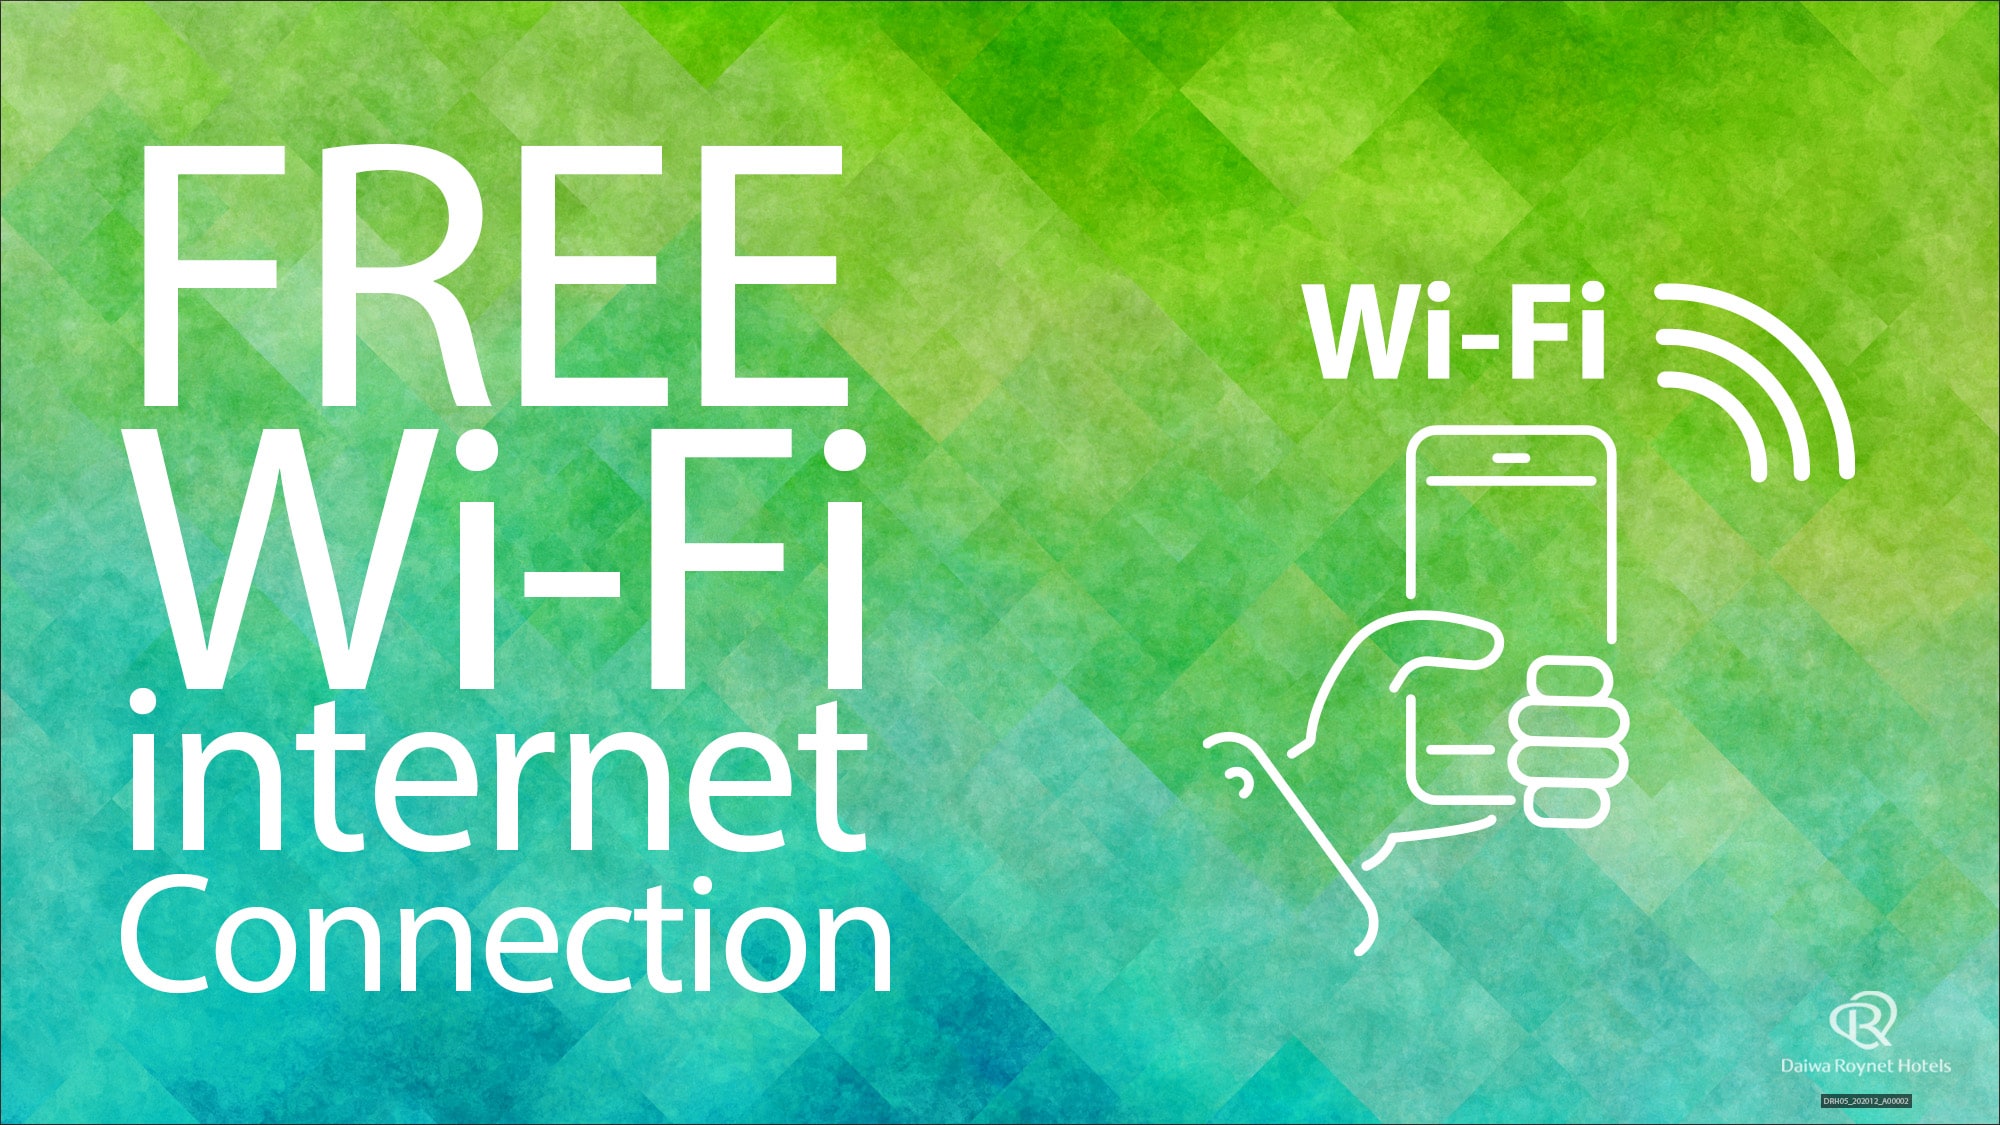 Fully equipped with ◆ Free-wifi ◆